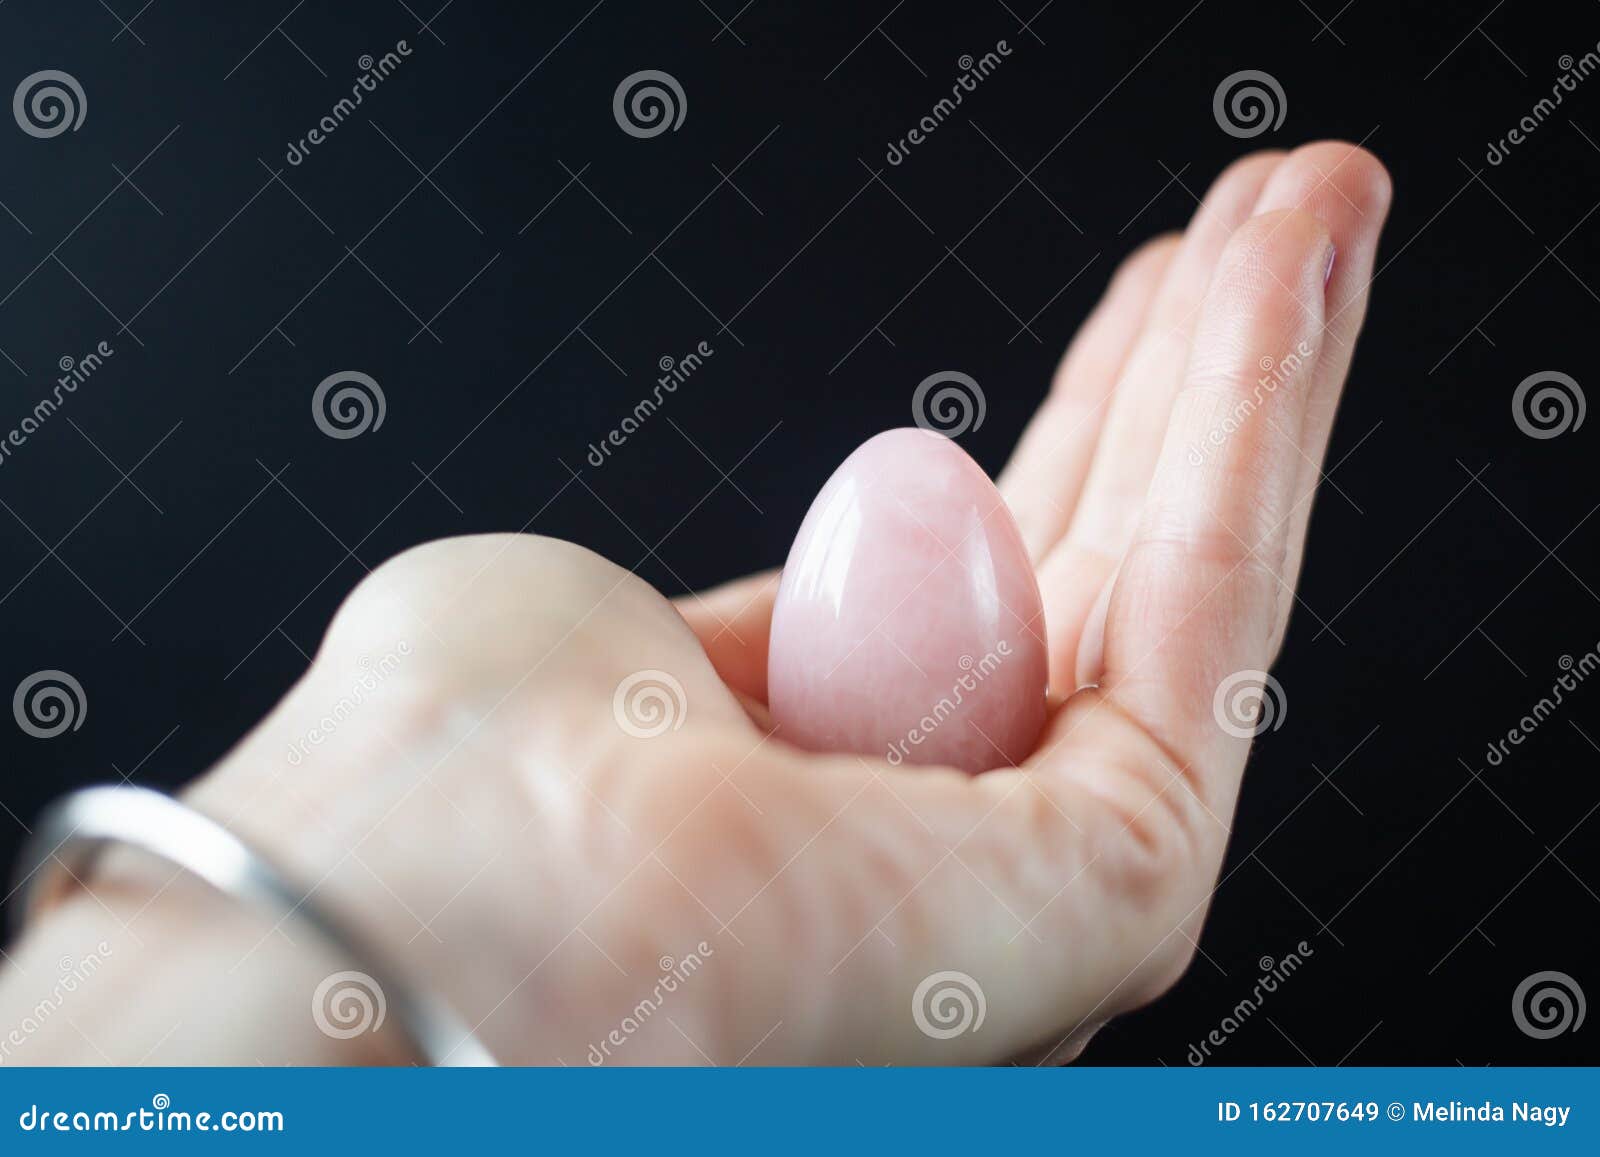 Hand Holding Penis